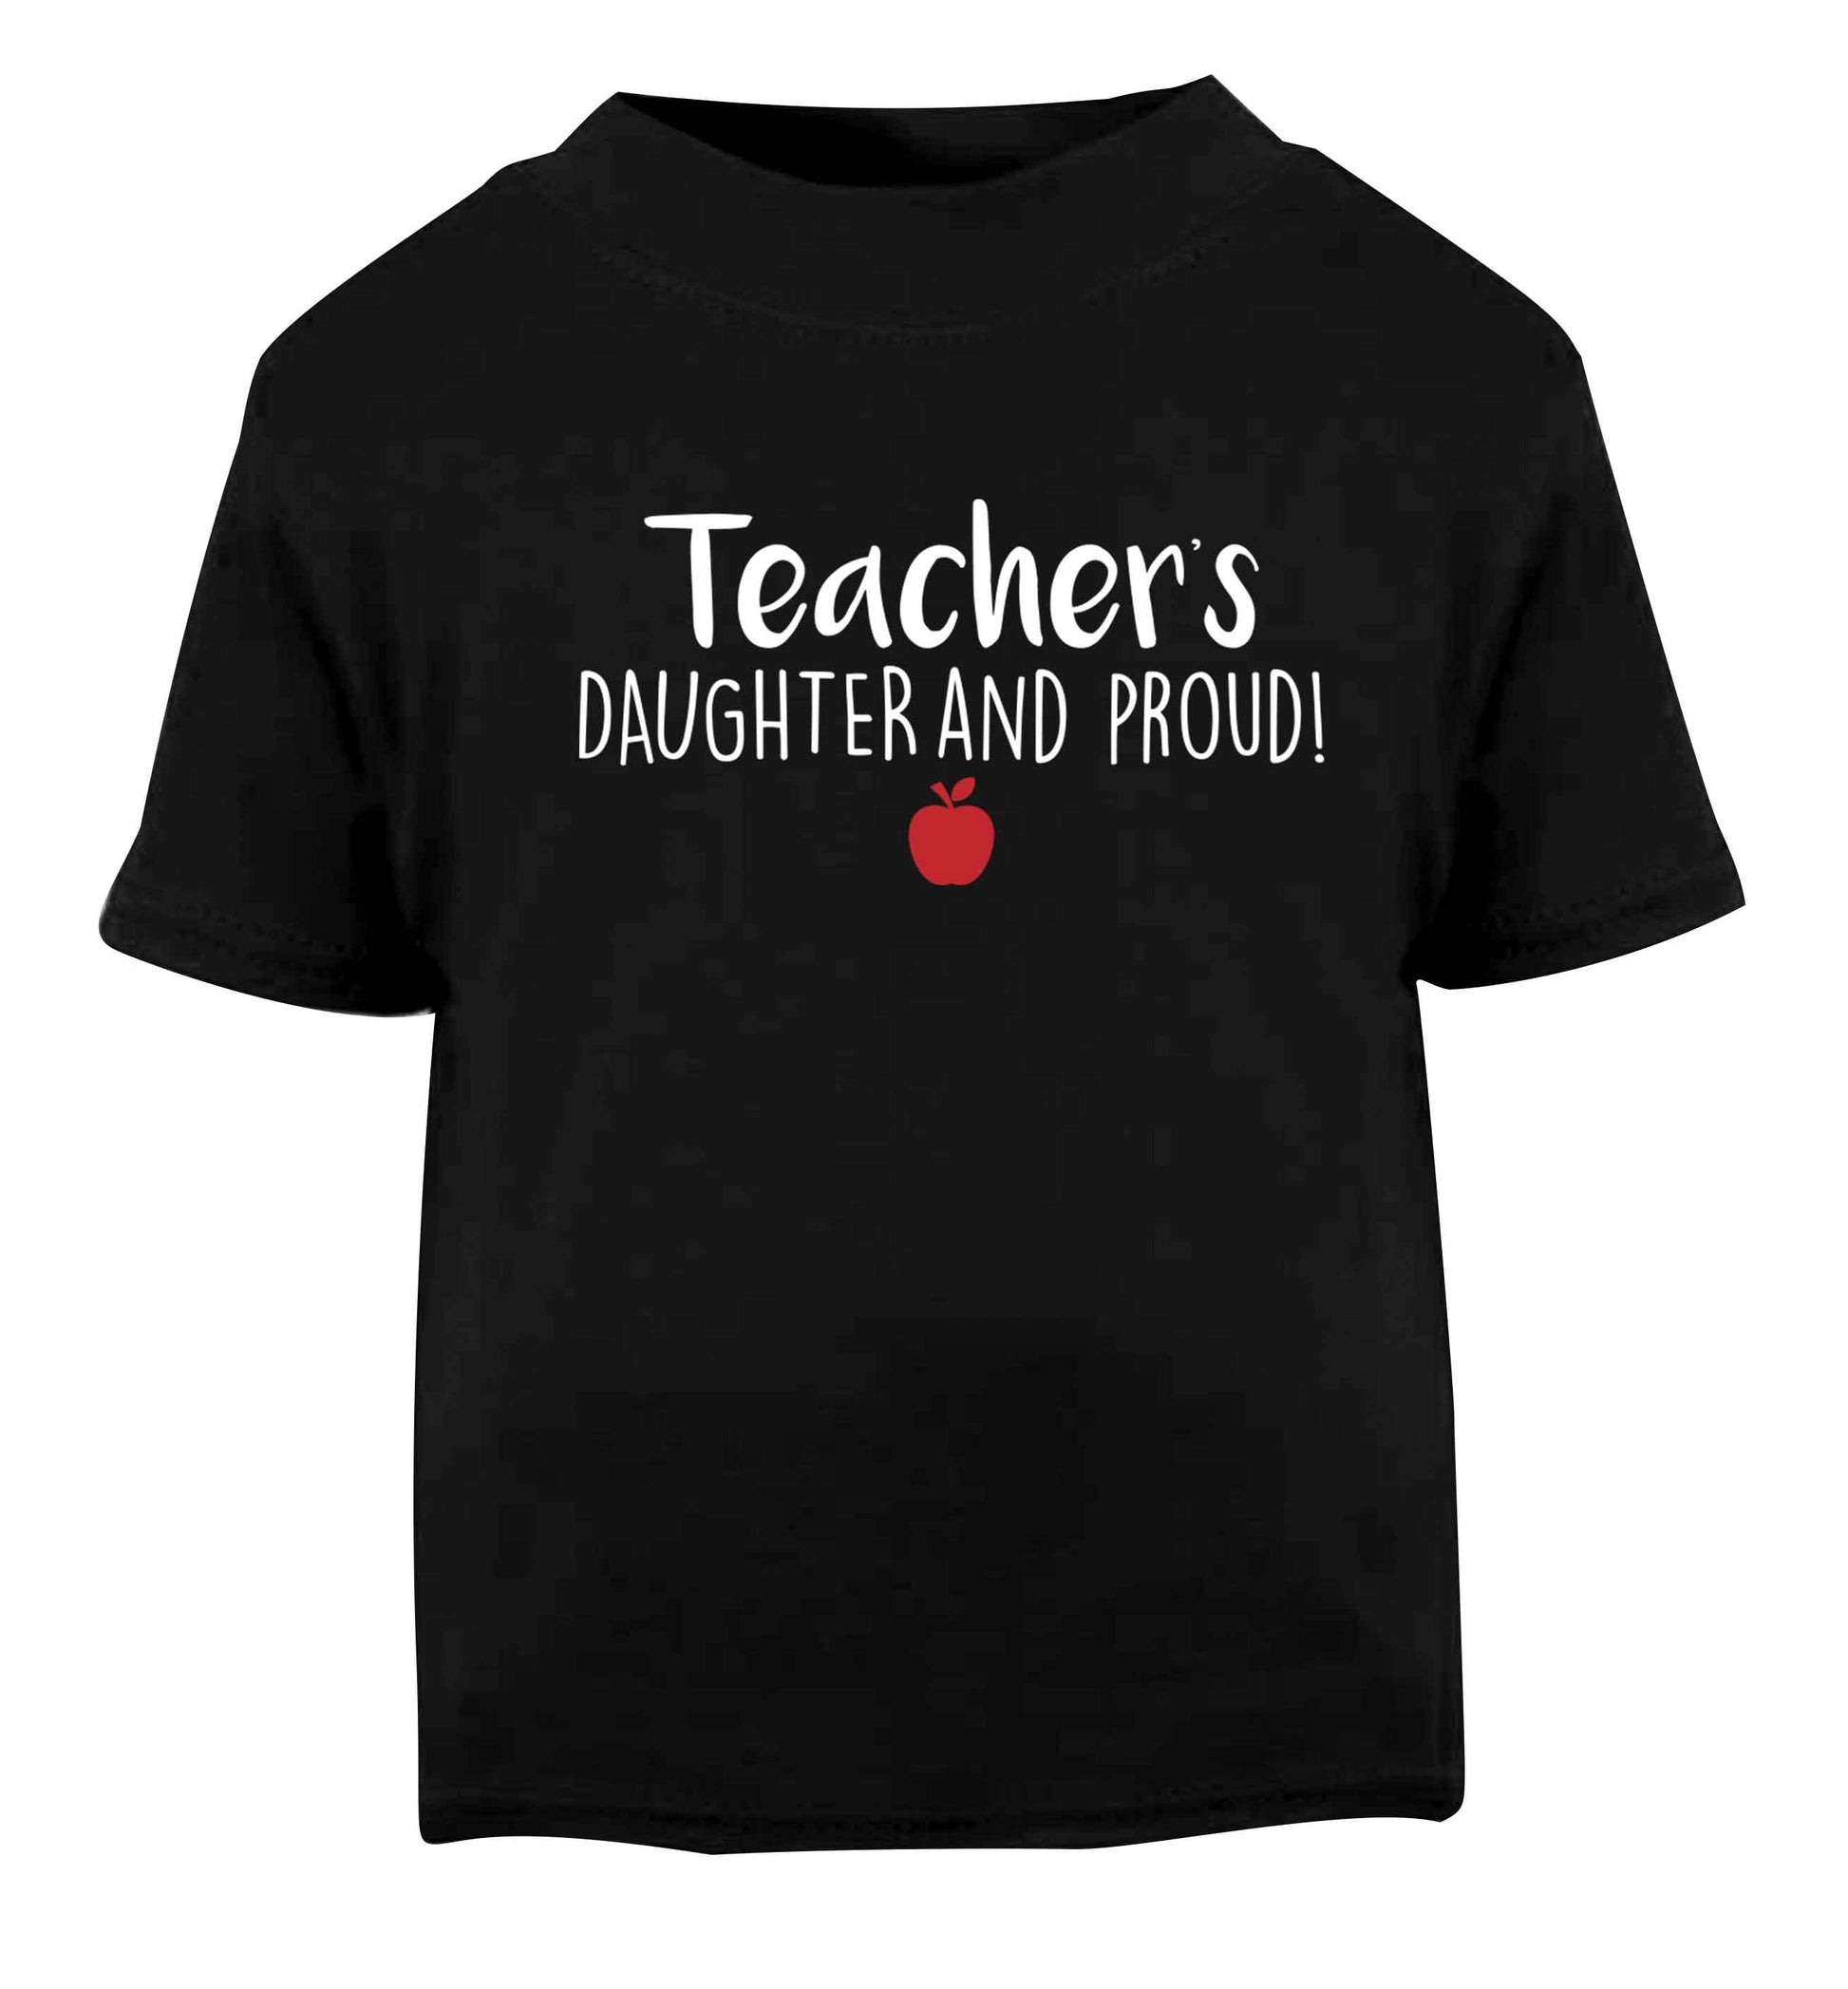 Teachers daughter and proud Black baby toddler Tshirt 2 years